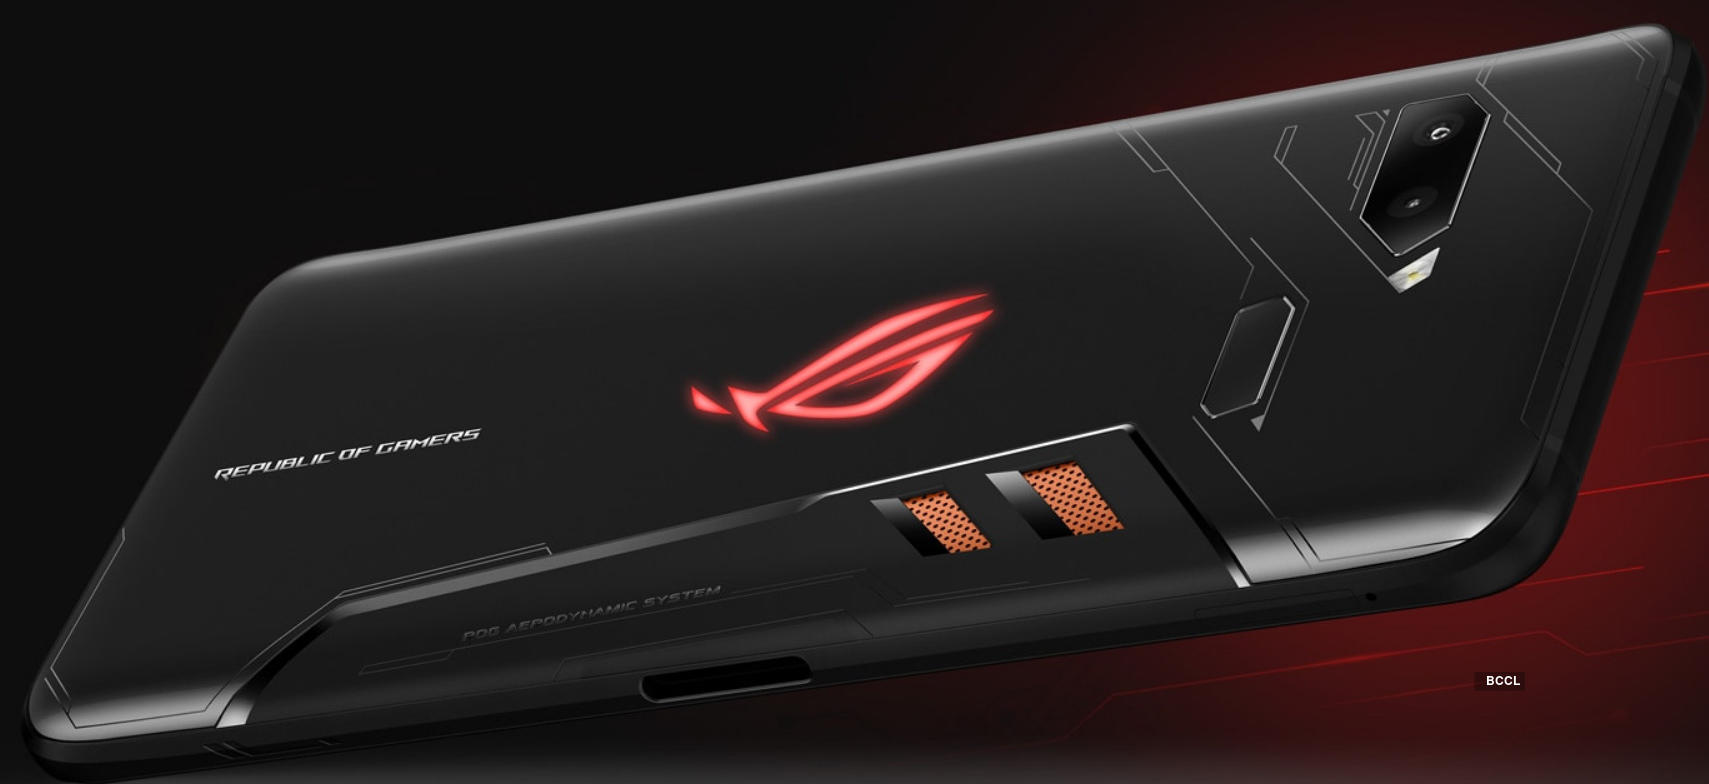 Asus ROG gaming smartphone launched in India